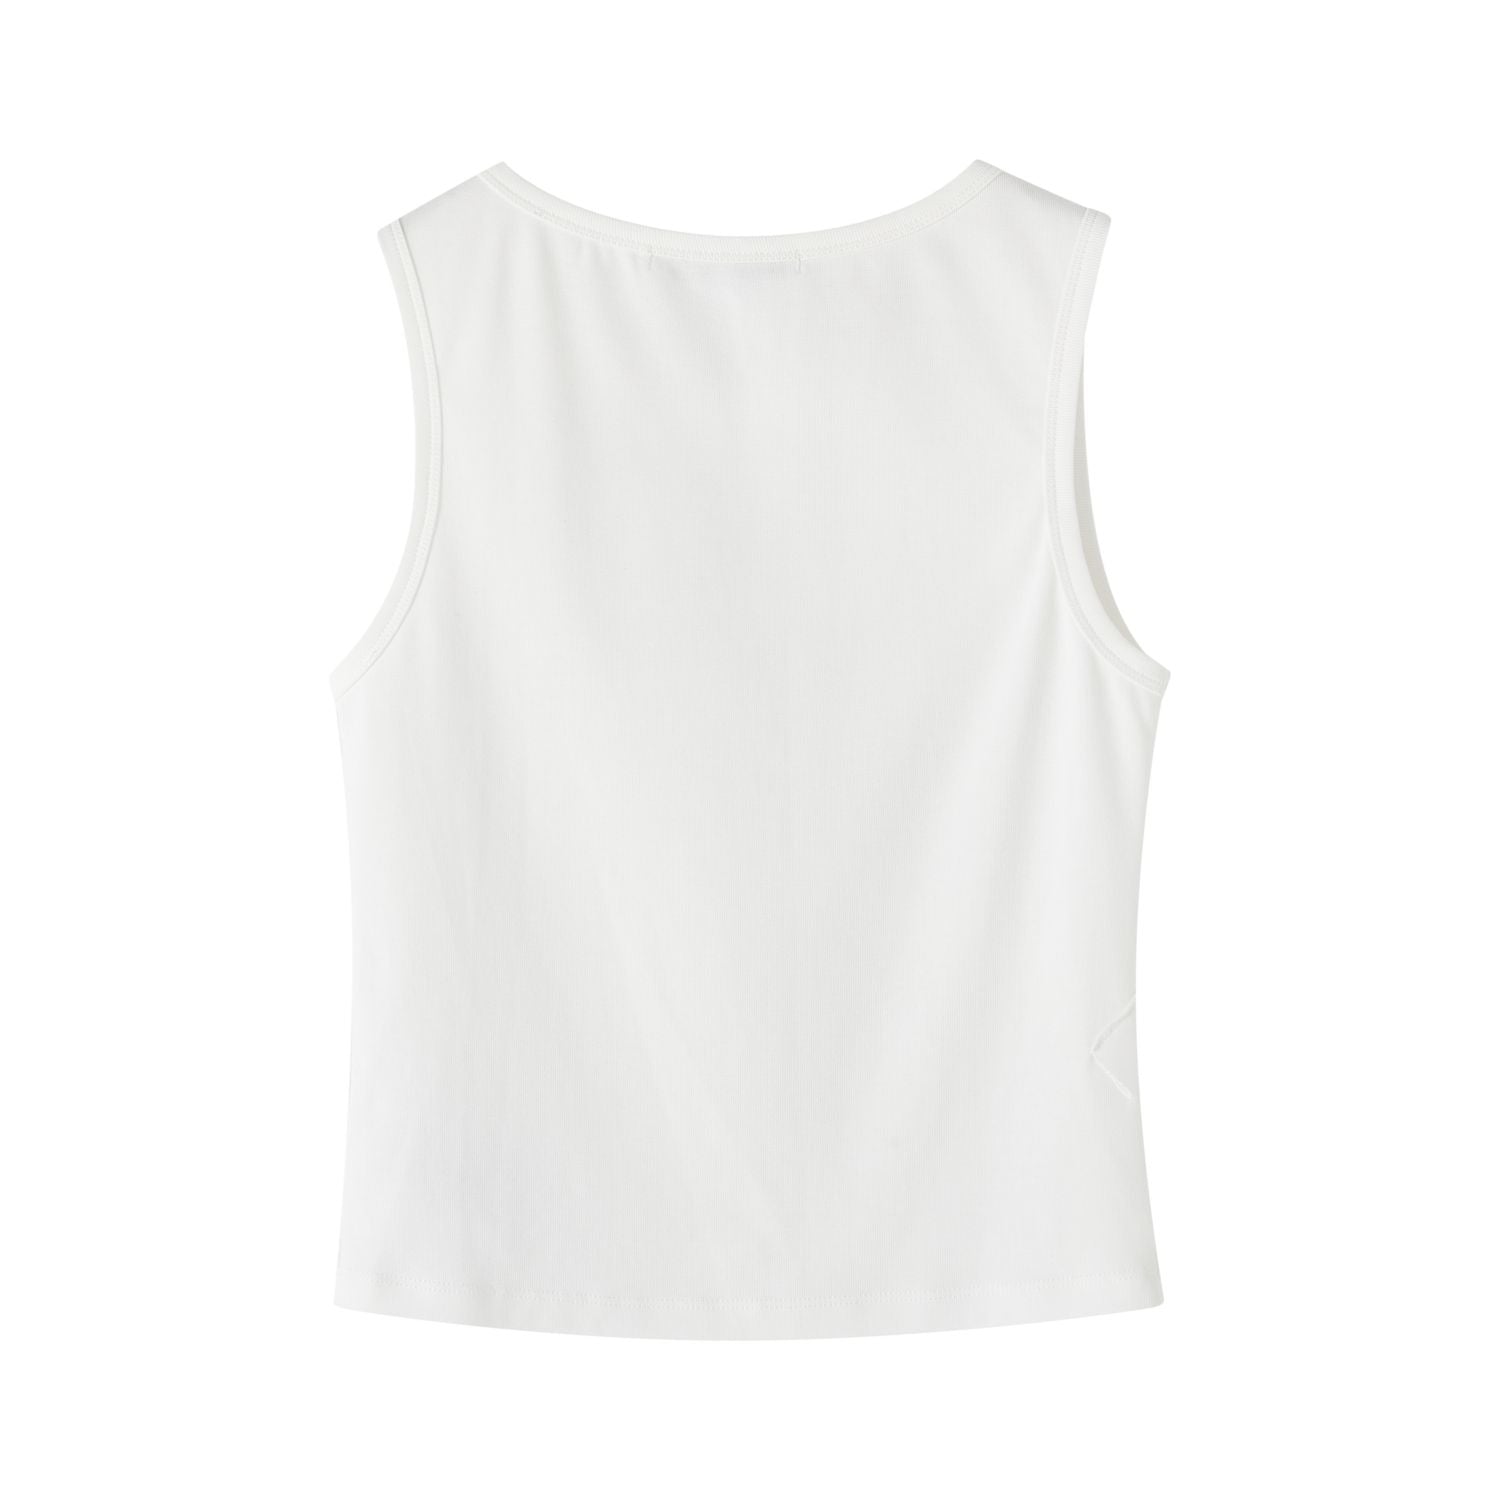 Origami Bow Tank Top in White